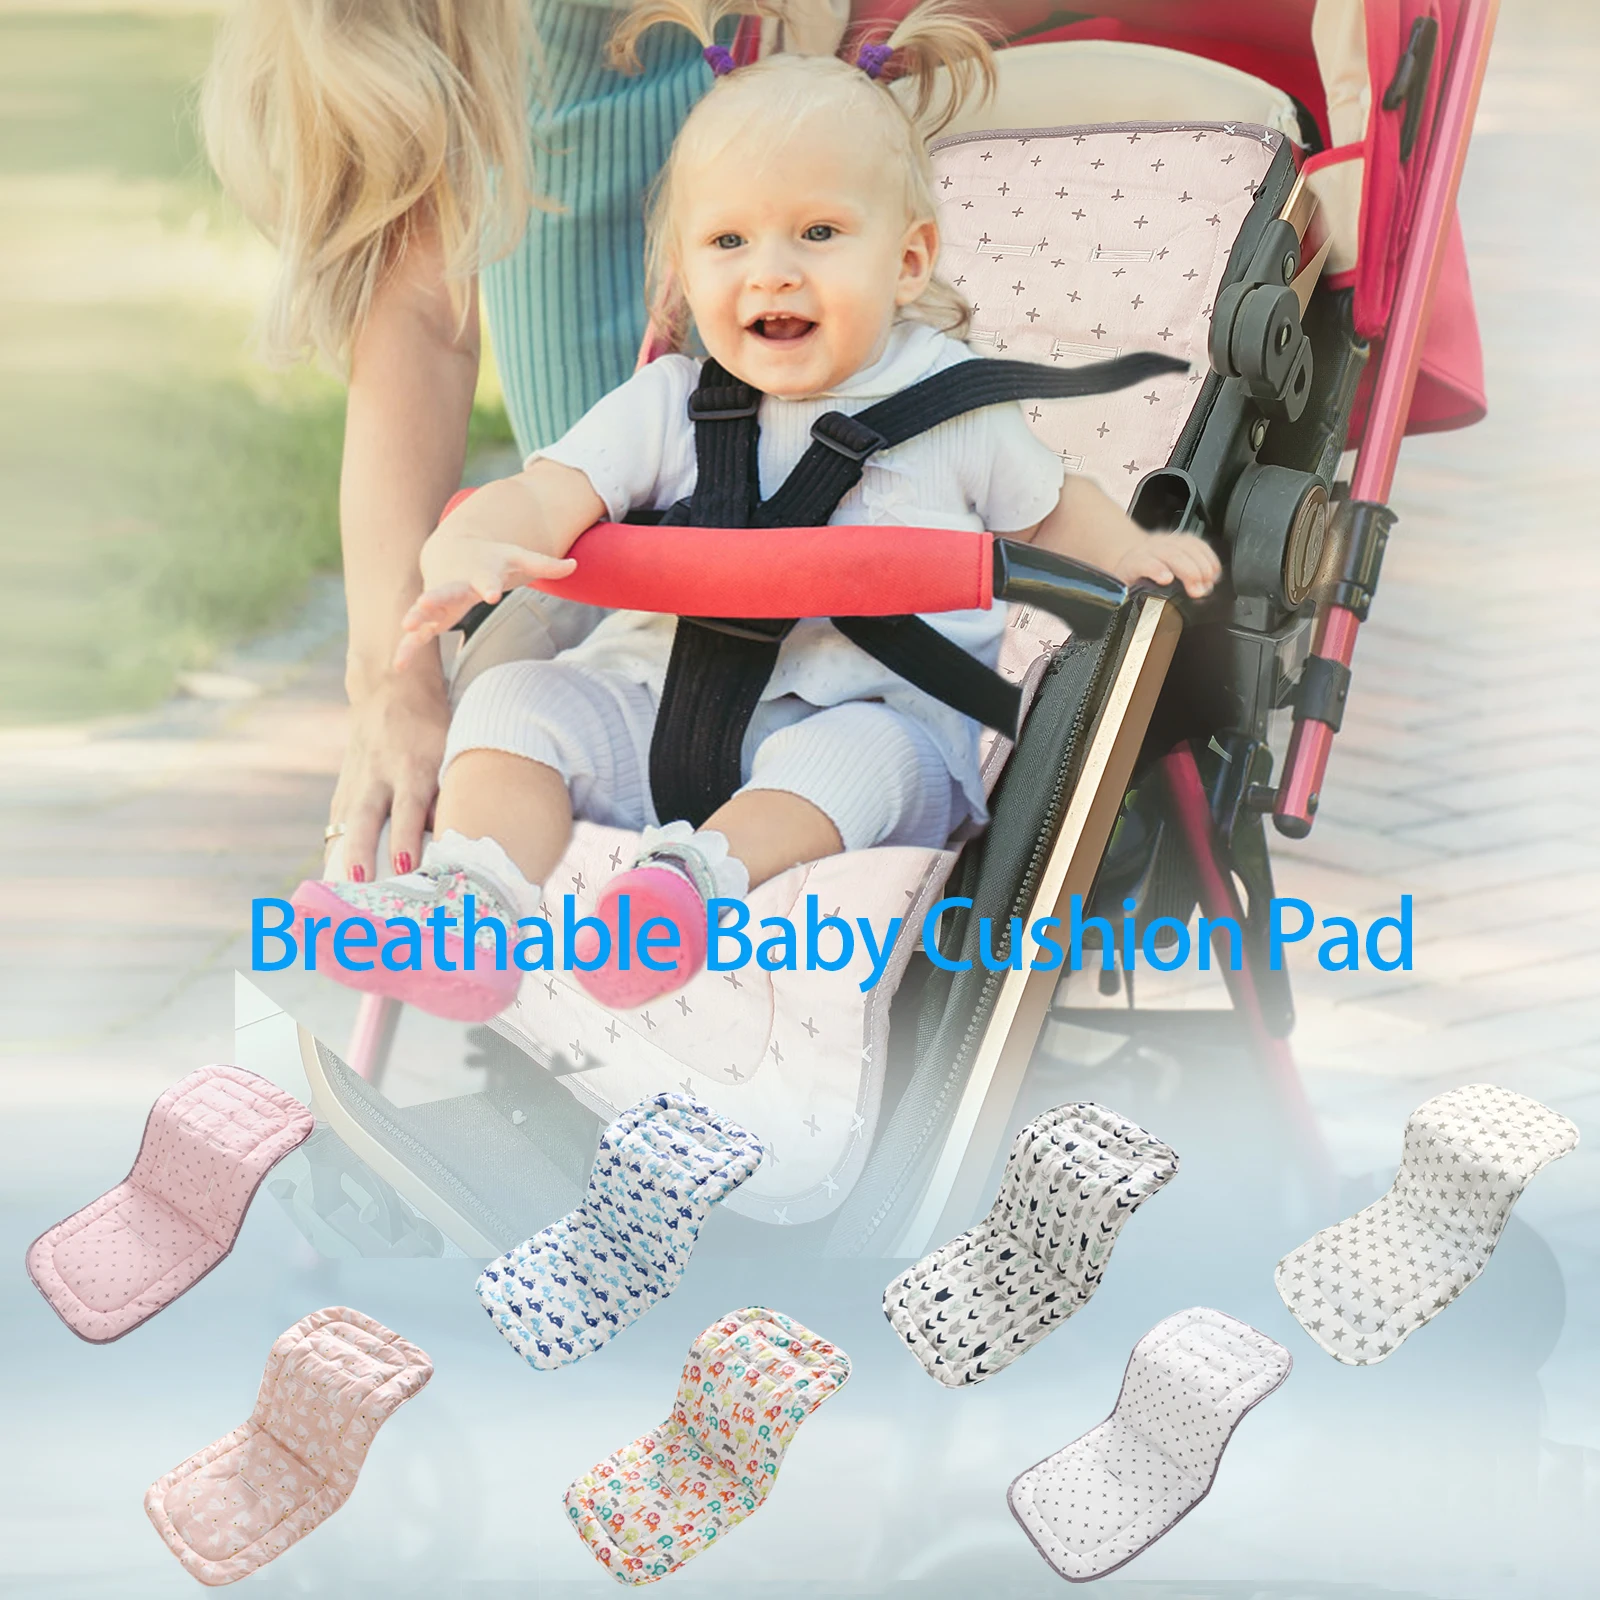 best travel stroller for baby and toddler	 Baby Stroller Seat Cotton Comfortable Soft Child Cart Mat Infant Cushion Buggy Pad Chair Pram Car Newborn Pushchairs Accessories best Baby Strollers